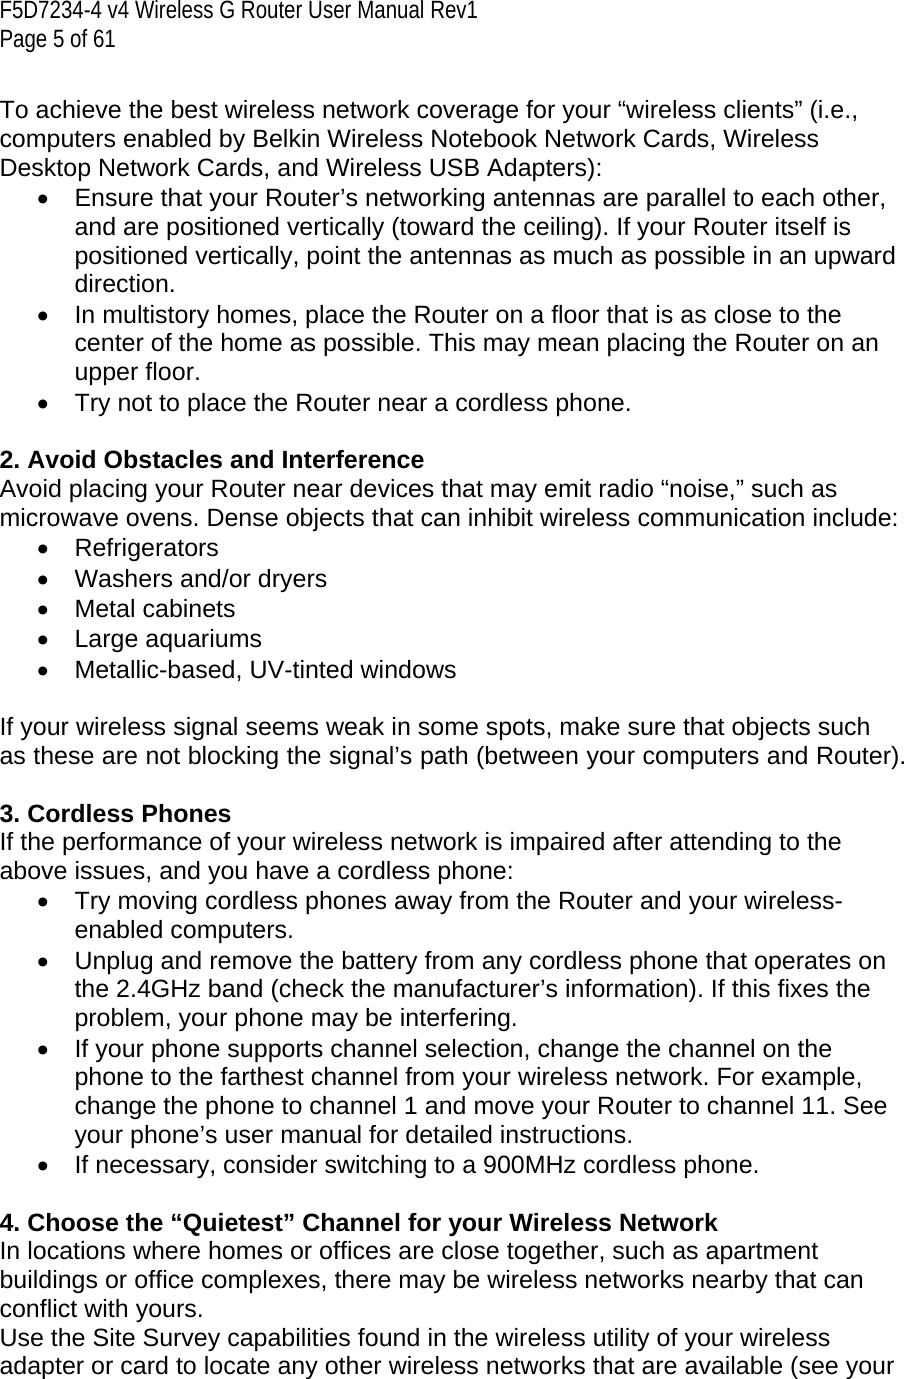 F5D7234-4 v4 Wireless G Router User Manual Rev1  Page 5 of 61   To achieve the best wireless network coverage for your “wireless clients” (i.e., computers enabled by Belkin Wireless Notebook Network Cards, Wireless Desktop Network Cards, and Wireless USB Adapters):  •  Ensure that your Router’s networking antennas are parallel to each other, and are positioned vertically (toward the ceiling). If your Router itself is positioned vertically, point the antennas as much as possible in an upward direction.  •  In multistory homes, place the Router on a floor that is as close to the center of the home as possible. This may mean placing the Router on an upper floor. •  Try not to place the Router near a cordless phone.  2. Avoid Obstacles and Interference Avoid placing your Router near devices that may emit radio “noise,” such as microwave ovens. Dense objects that can inhibit wireless communication include:  • Refrigerators •  Washers and/or dryers • Metal cabinets • Large aquariums •  Metallic-based, UV-tinted windows   If your wireless signal seems weak in some spots, make sure that objects such as these are not blocking the signal’s path (between your computers and Router).  3. Cordless Phones If the performance of your wireless network is impaired after attending to the above issues, and you have a cordless phone:  •  Try moving cordless phones away from the Router and your wireless-enabled computers. •  Unplug and remove the battery from any cordless phone that operates on the 2.4GHz band (check the manufacturer’s information). If this fixes the problem, your phone may be interfering.  •  If your phone supports channel selection, change the channel on the phone to the farthest channel from your wireless network. For example, change the phone to channel 1 and move your Router to channel 11. See your phone’s user manual for detailed instructions. •  If necessary, consider switching to a 900MHz cordless phone.  4. Choose the “Quietest” Channel for your Wireless Network In locations where homes or offices are close together, such as apartment buildings or office complexes, there may be wireless networks nearby that can conflict with yours.  Use the Site Survey capabilities found in the wireless utility of your wireless adapter or card to locate any other wireless networks that are available (see your 